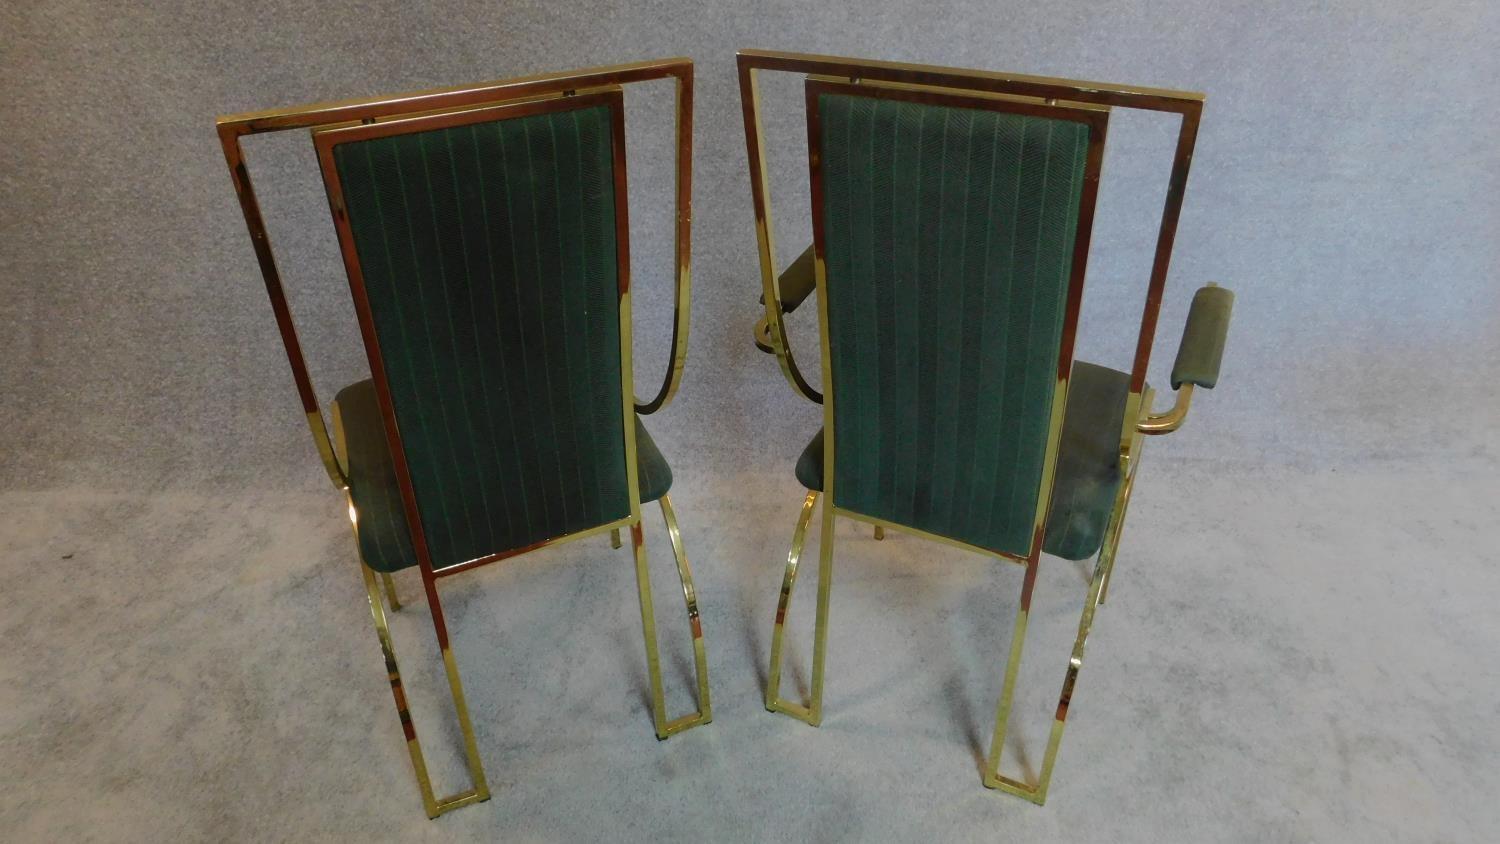 A set of 8 vintage Italian metal framed dining chairs H.105 W.45 D.50cm - Image 3 of 4